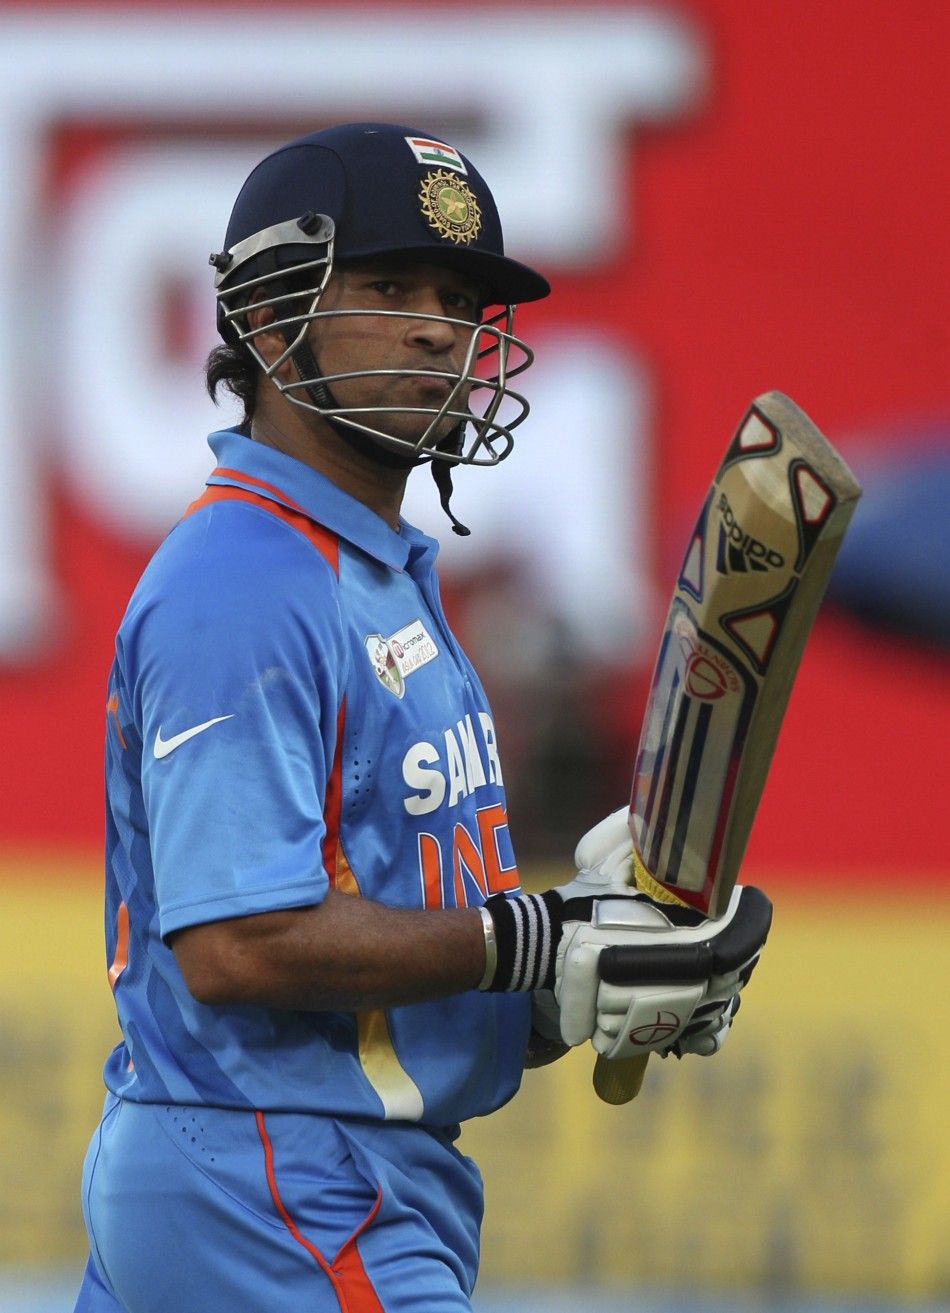 Indias Sachin Tendulkar comes off the field after being dismissed as he scored his 100th international centuries against Bangladesh during their One Day International ODI cricket match of Asia Cup in Dhaka March 16, 2012. 